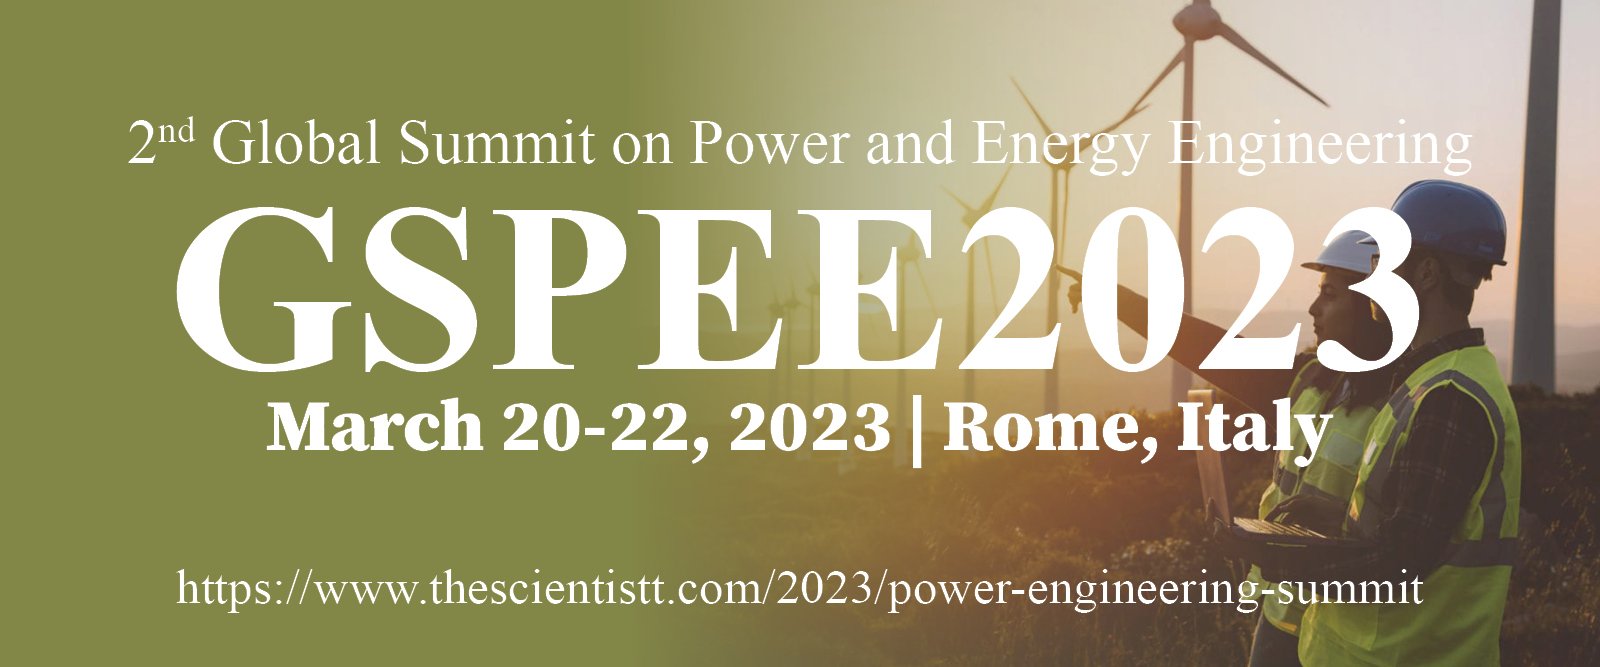 Power and Energy Engineering Conference GSPEE2023 Power and Energy